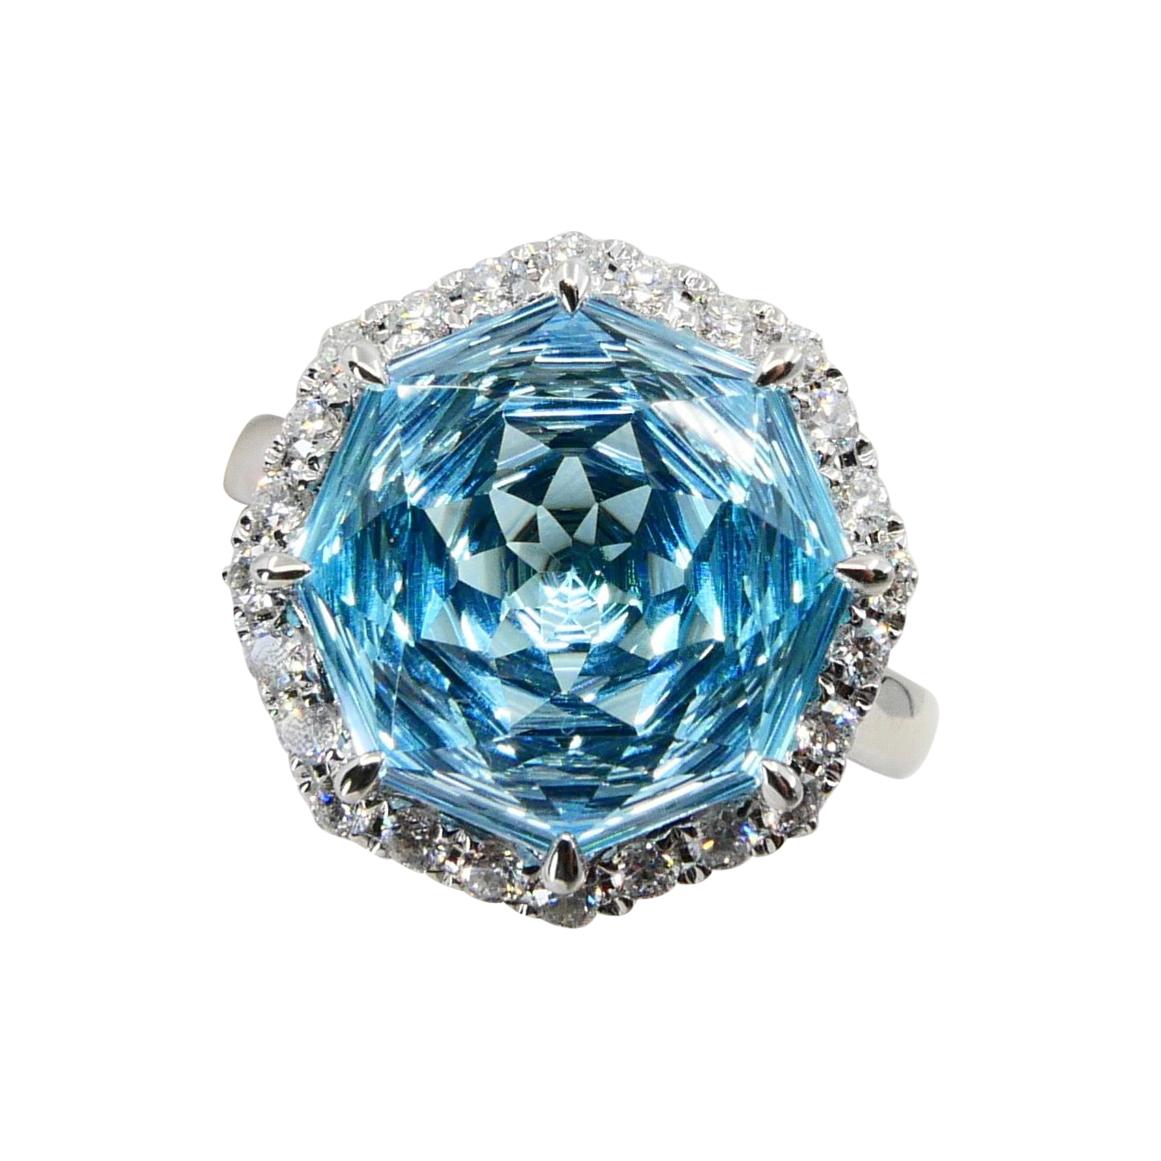 Flower Cut Powder Blue Topaz 7.86 Cts and Diamond Cocktail Ring, Statement Ring For Sale